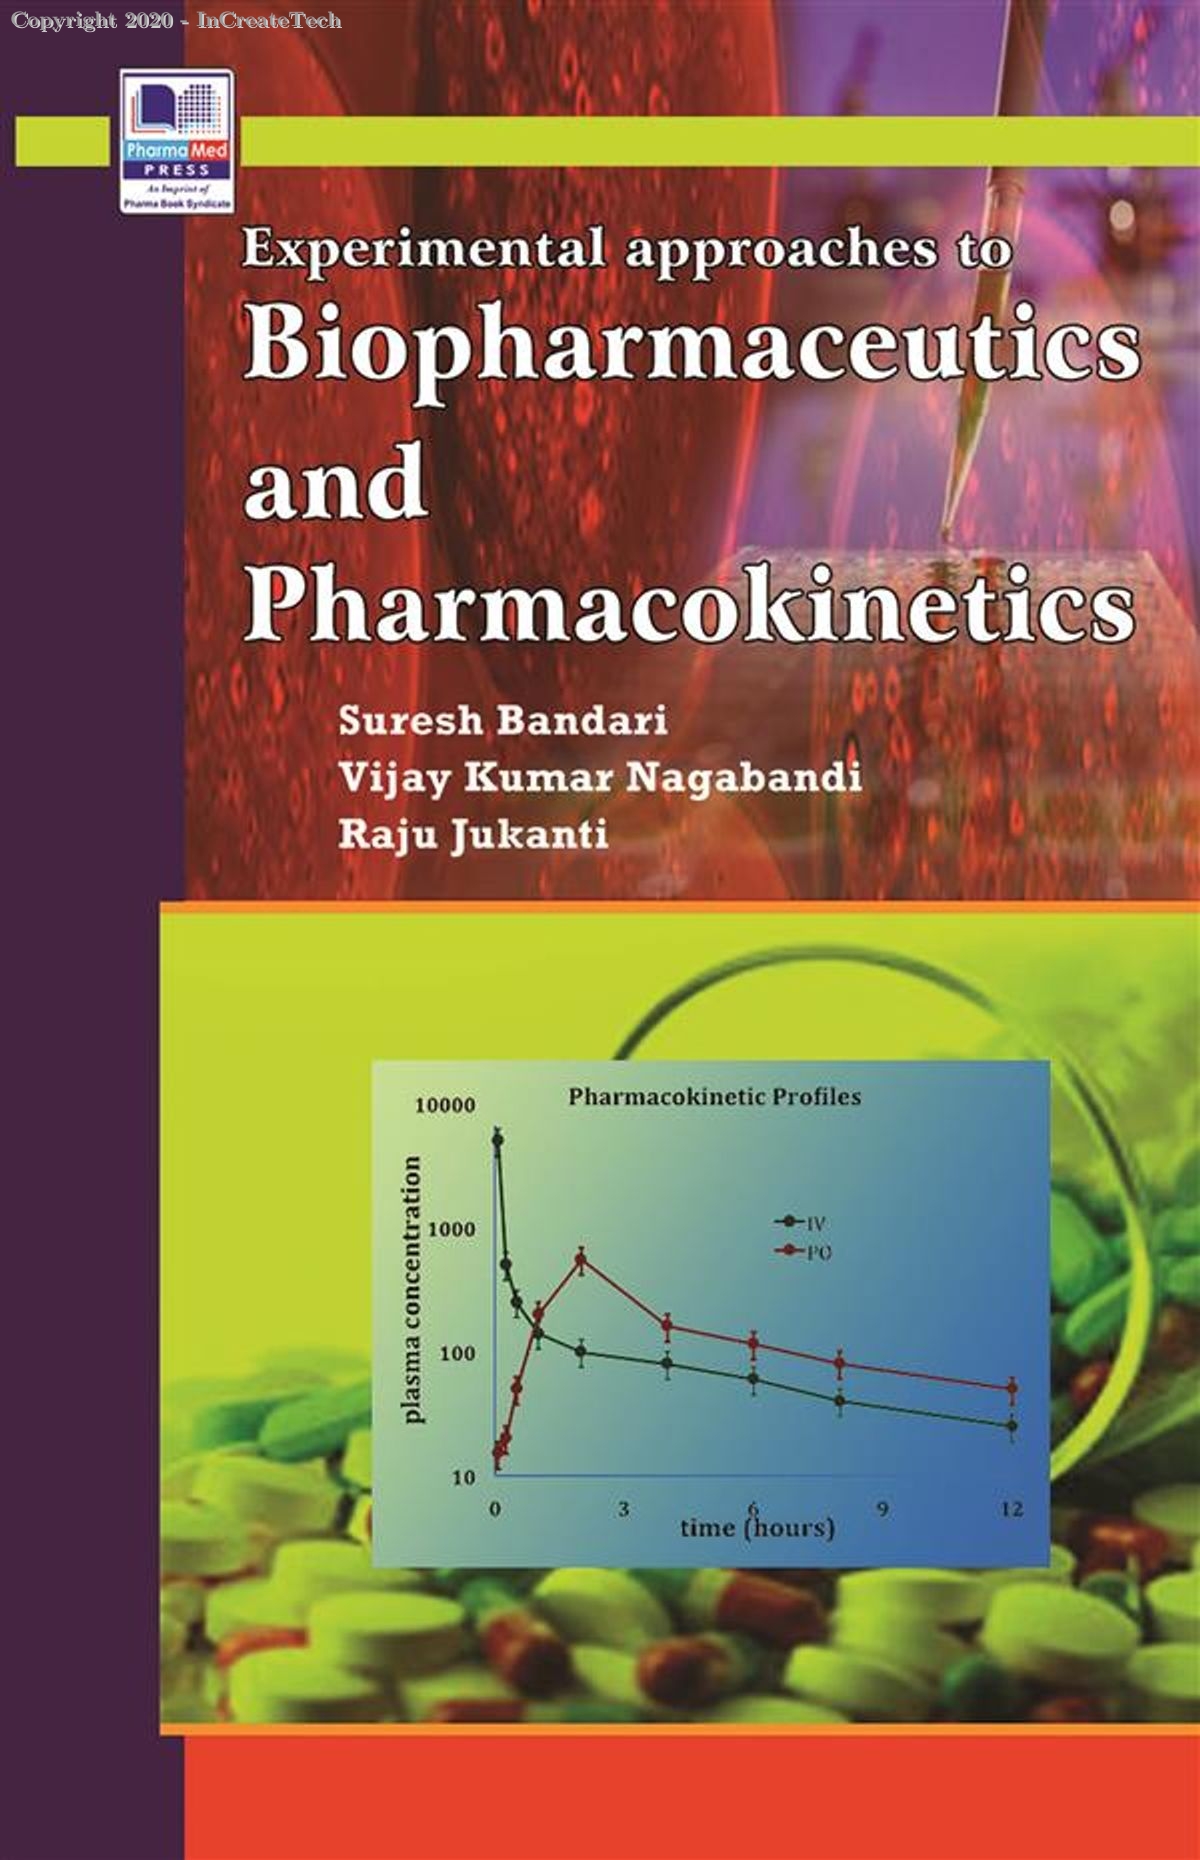 Experimental approaches to Biopharmaceutics and Pharmacokinetics